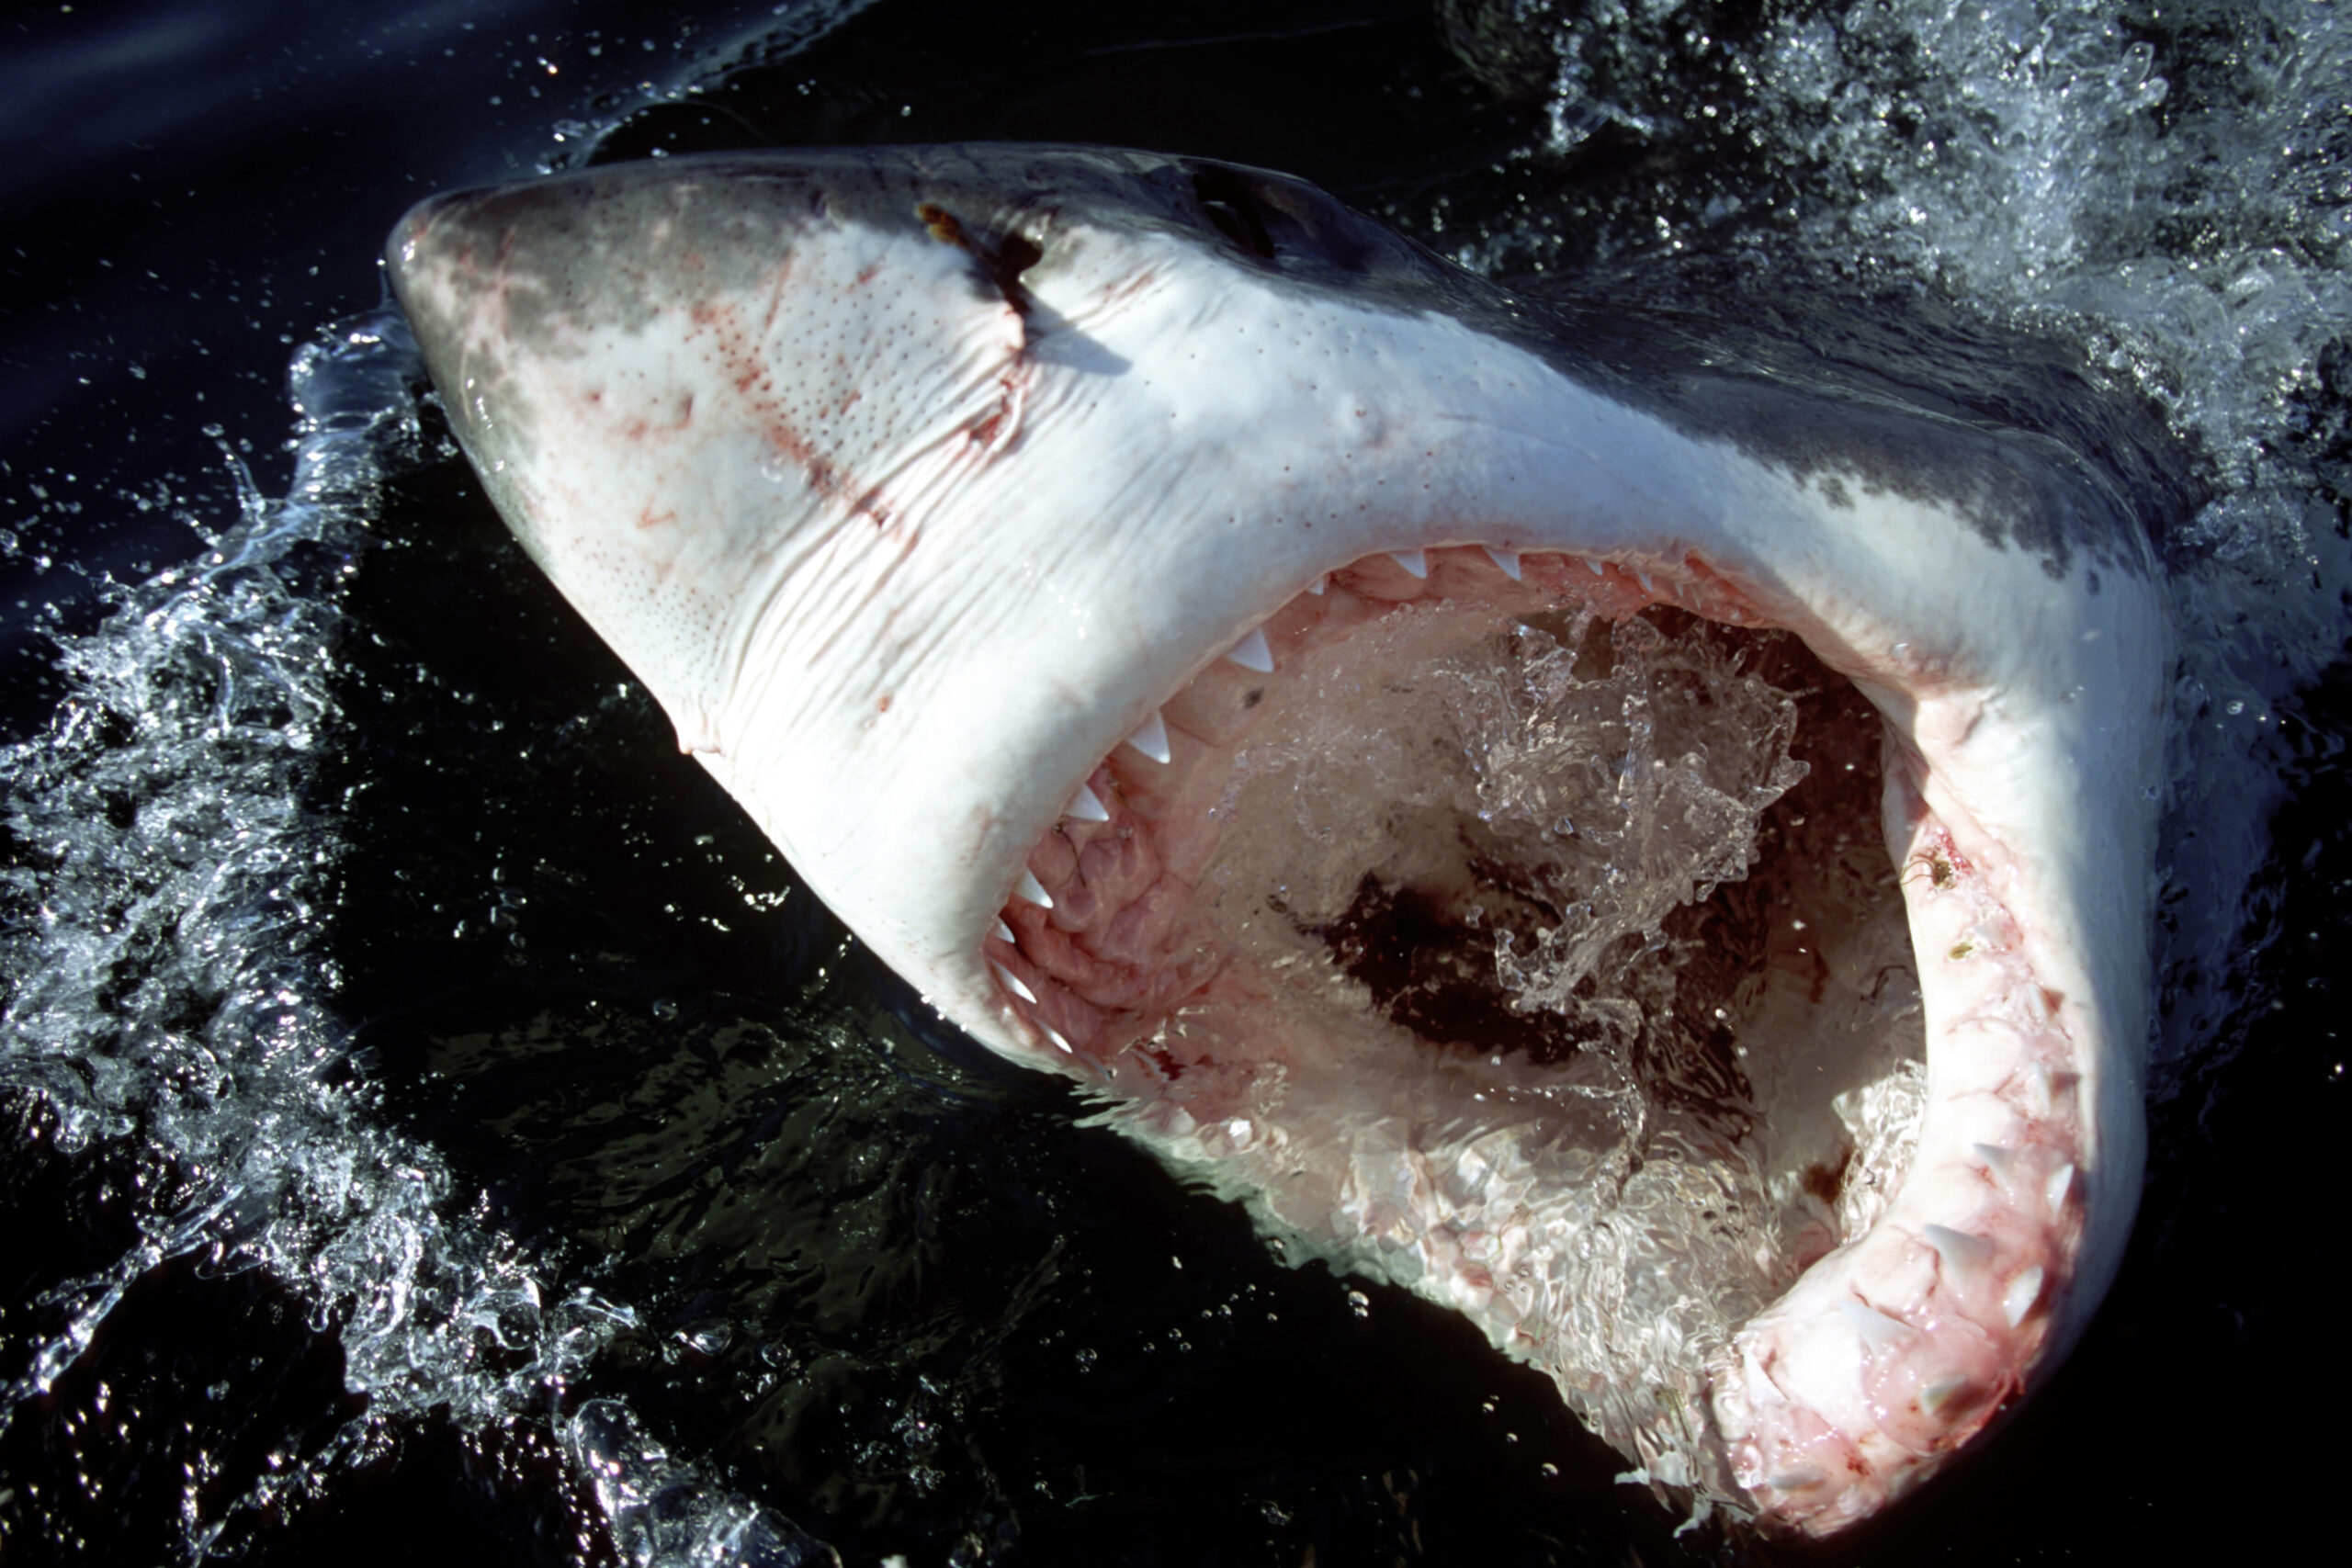 Rare shark attack in Maine may be linked to marine protection